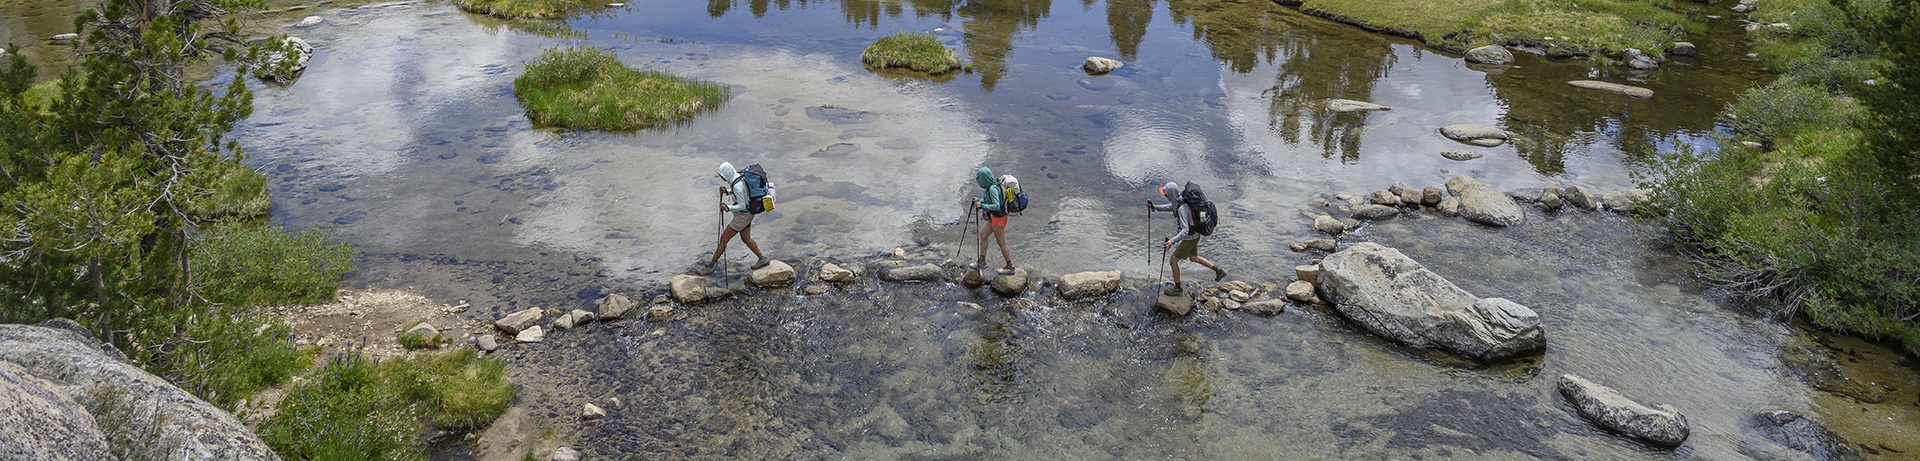 Backpackers rock hopping across a shallow river